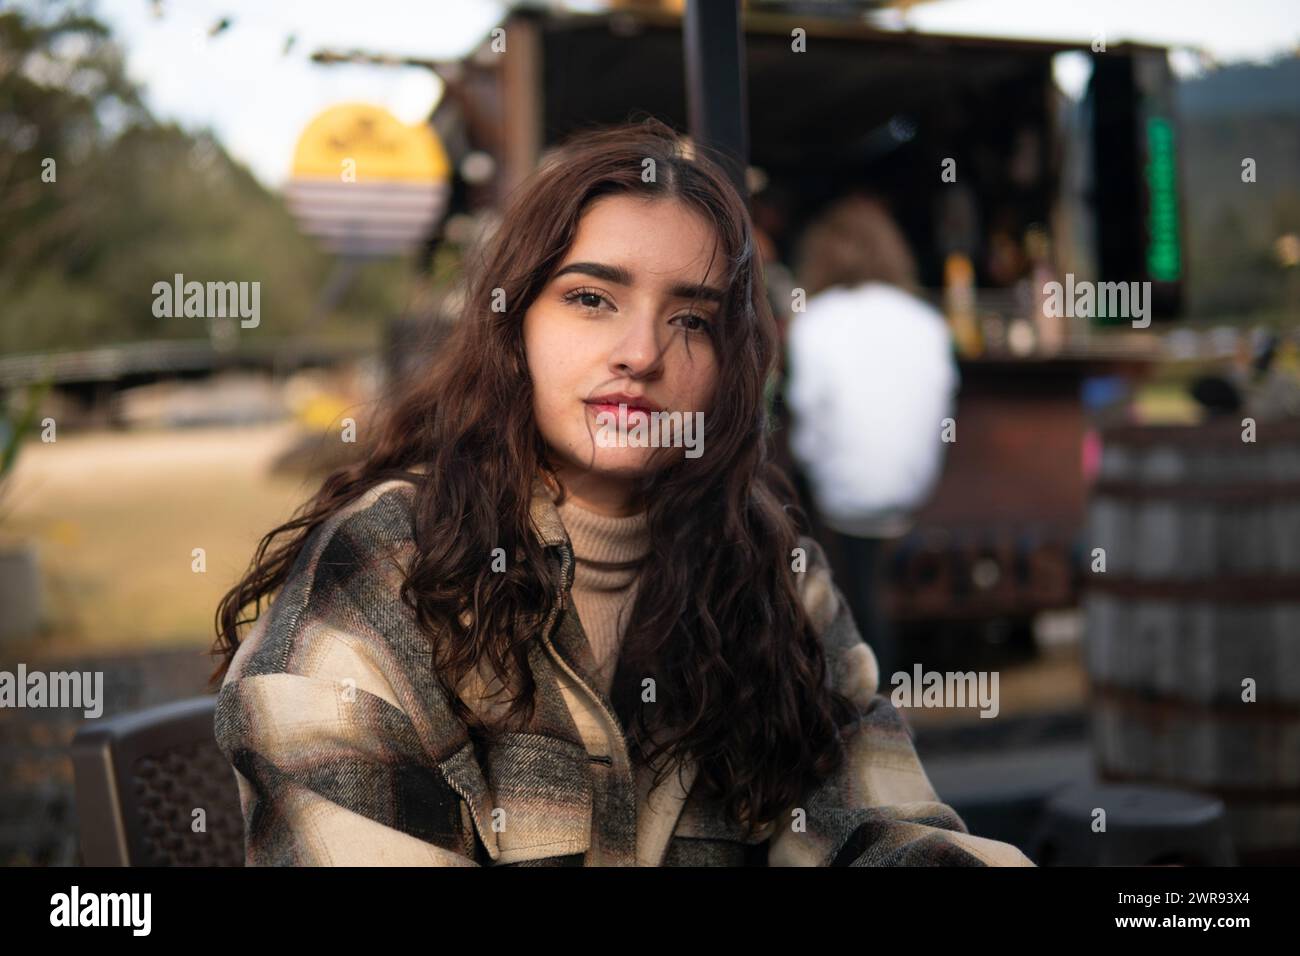 A young Latina woman with a warm smile sits comfortably at an outdoor cafe setting, exuding casual elegance Stock Photo